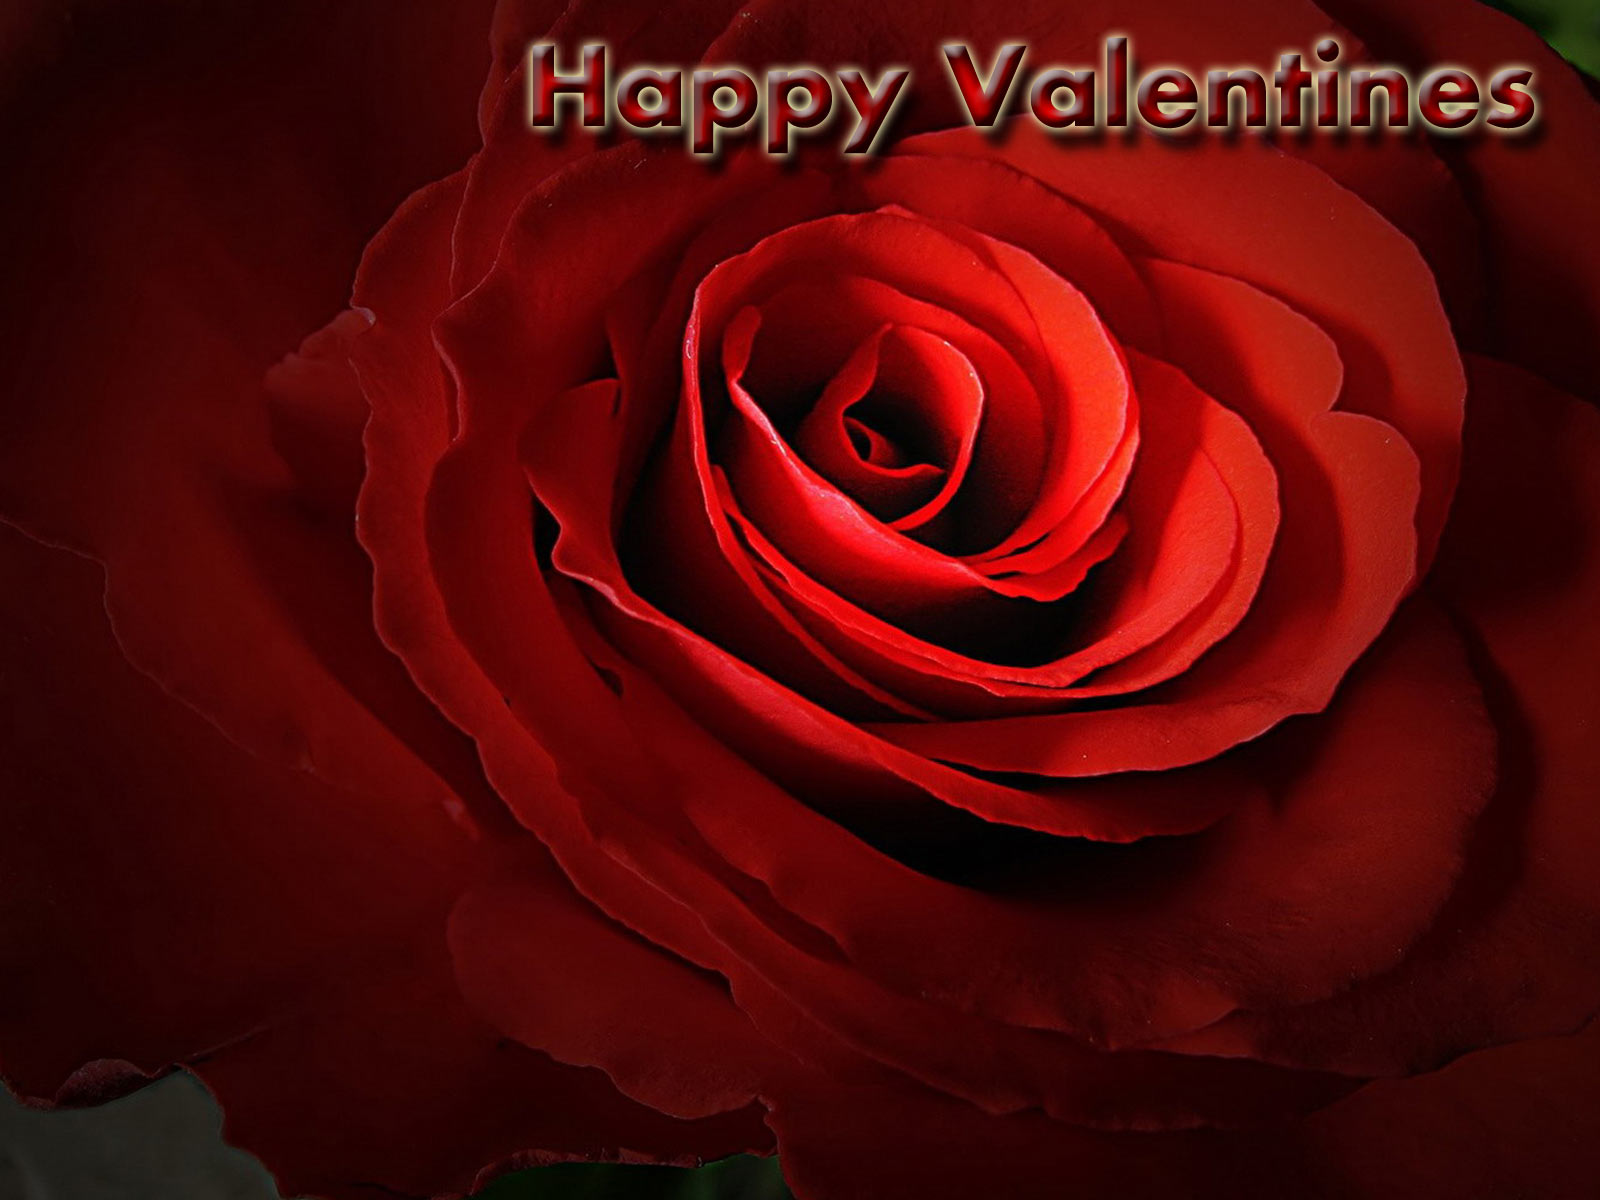 roses wallpapers valentine special wallpapers valentine wallpaper